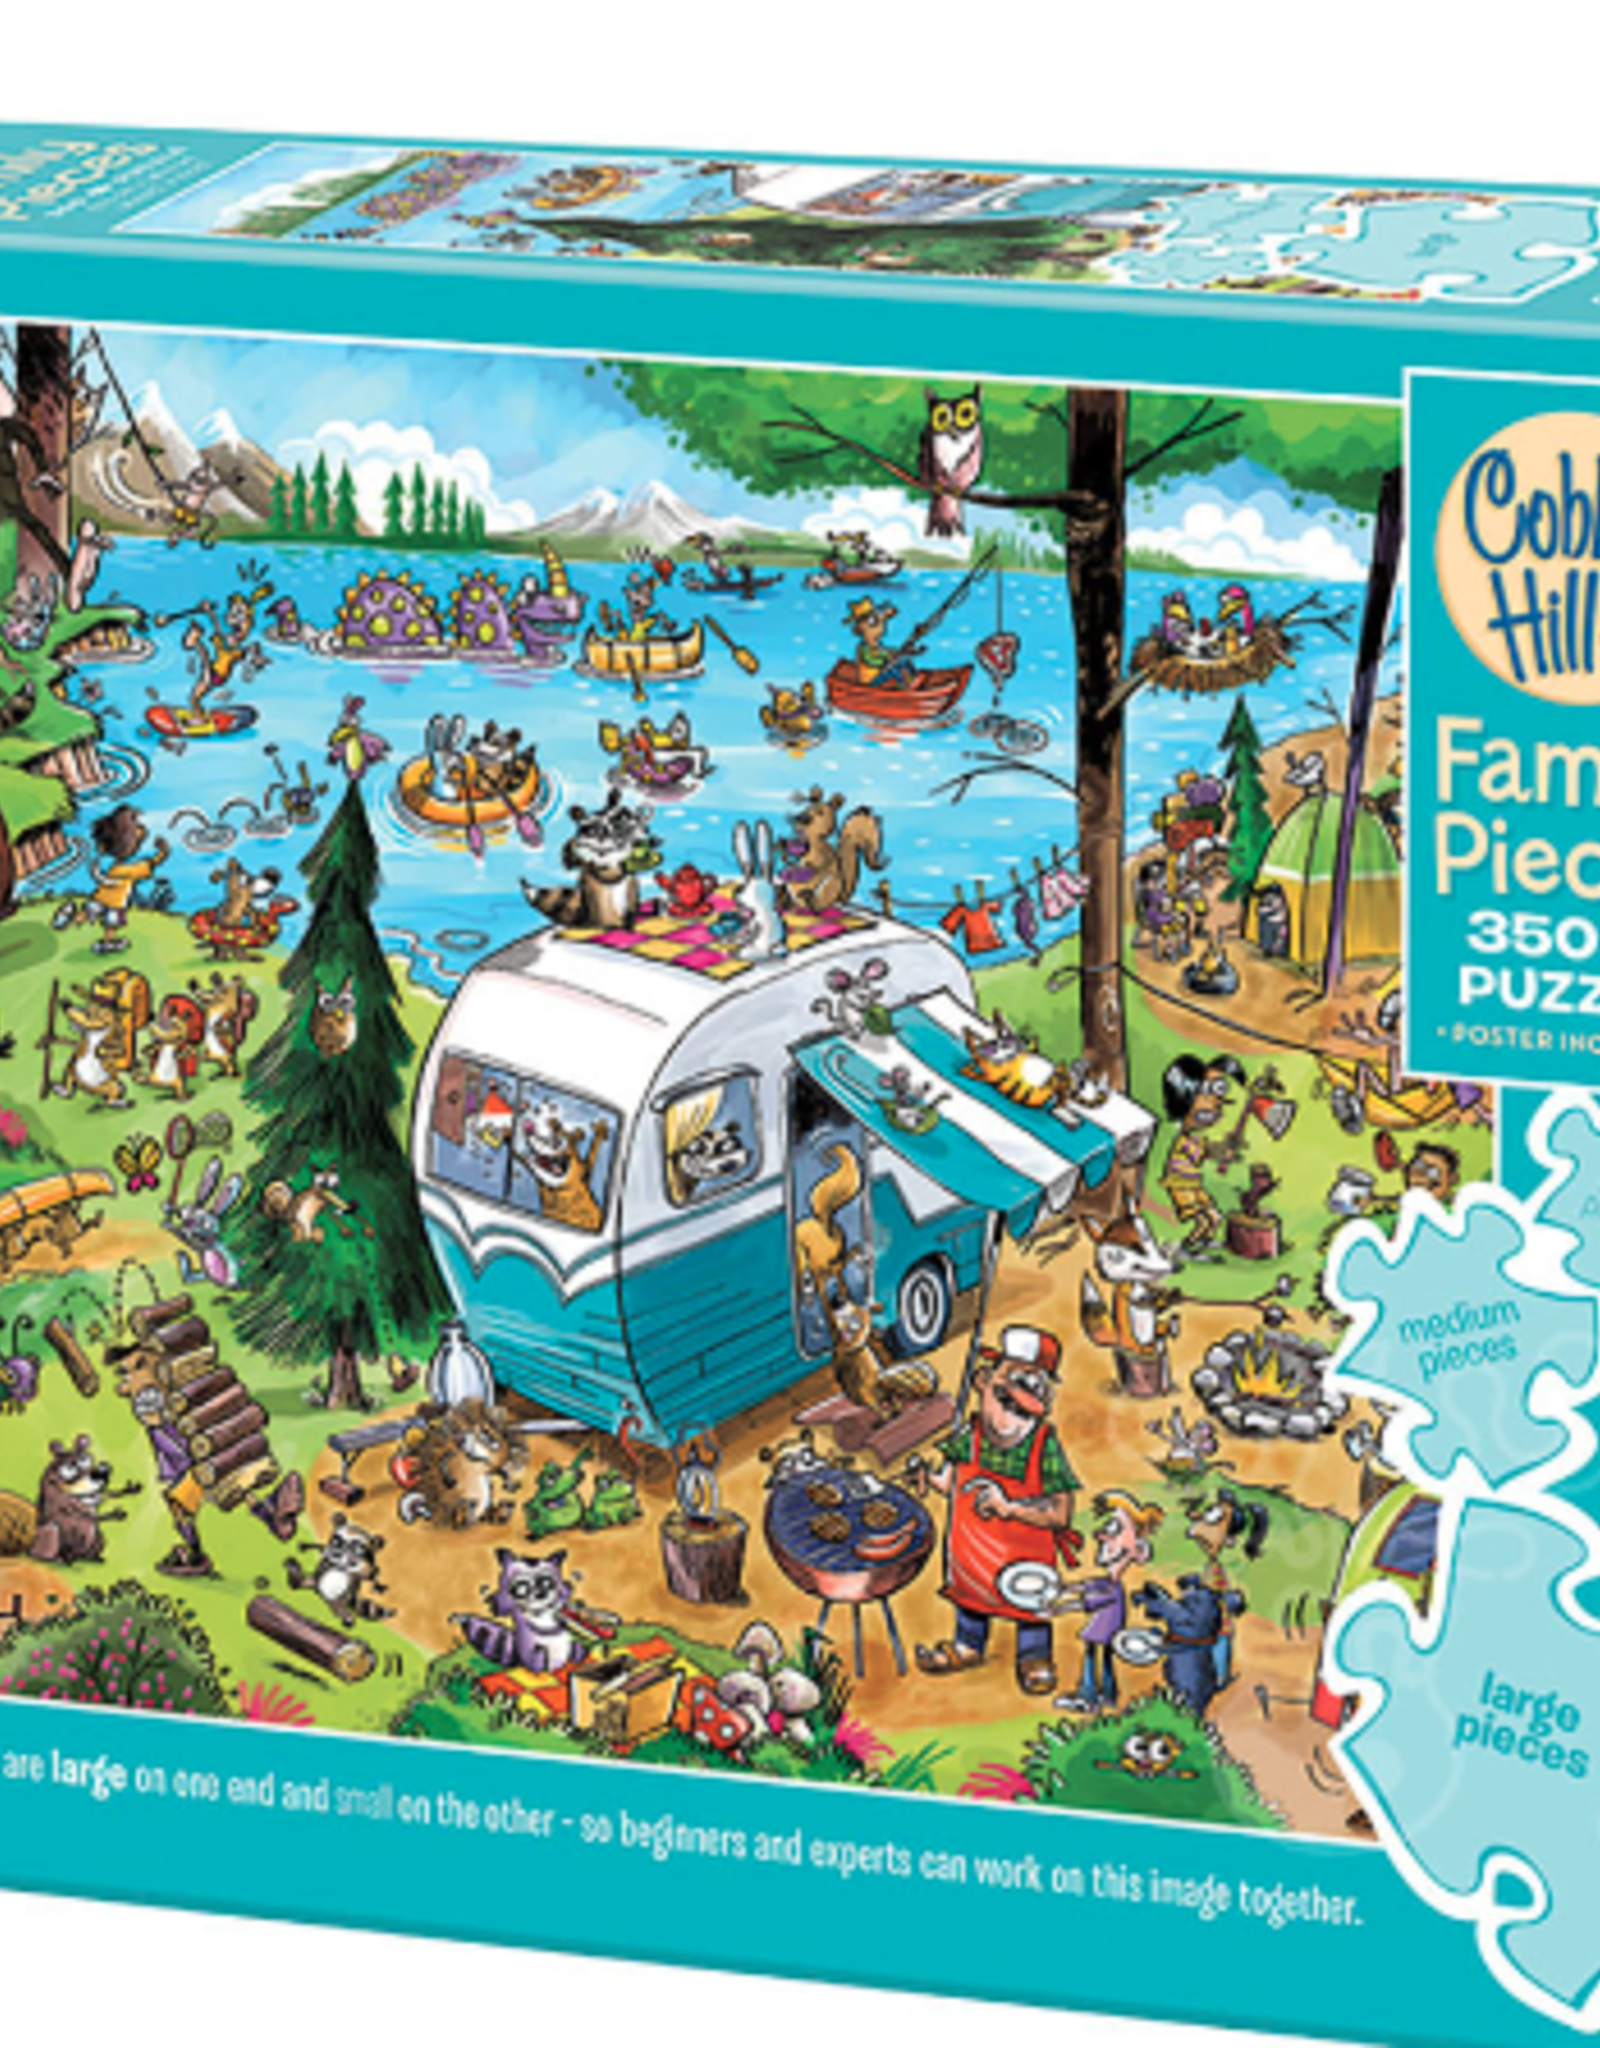 Cobble Hill Call of the wild Family Puzzle 350pc